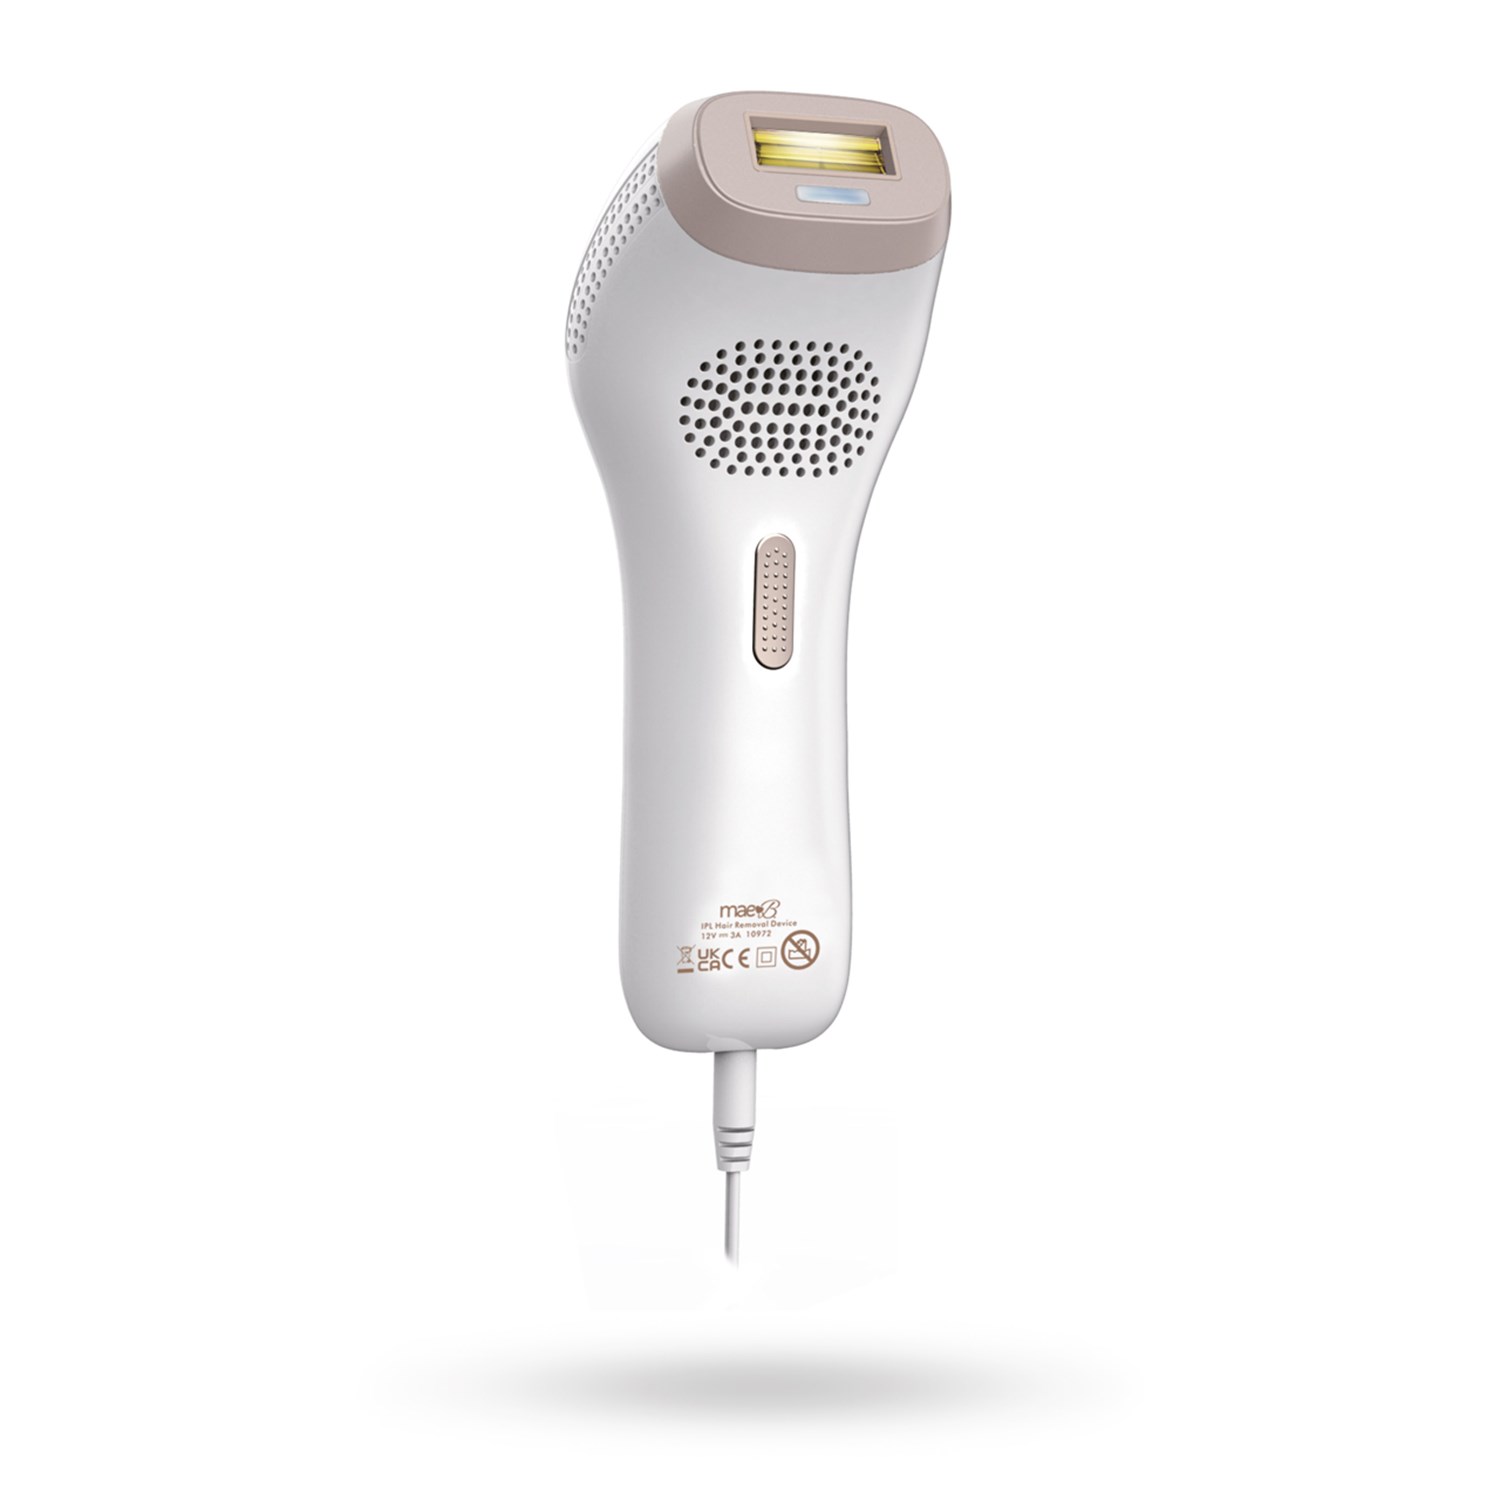 Ipl Hair Removal Device